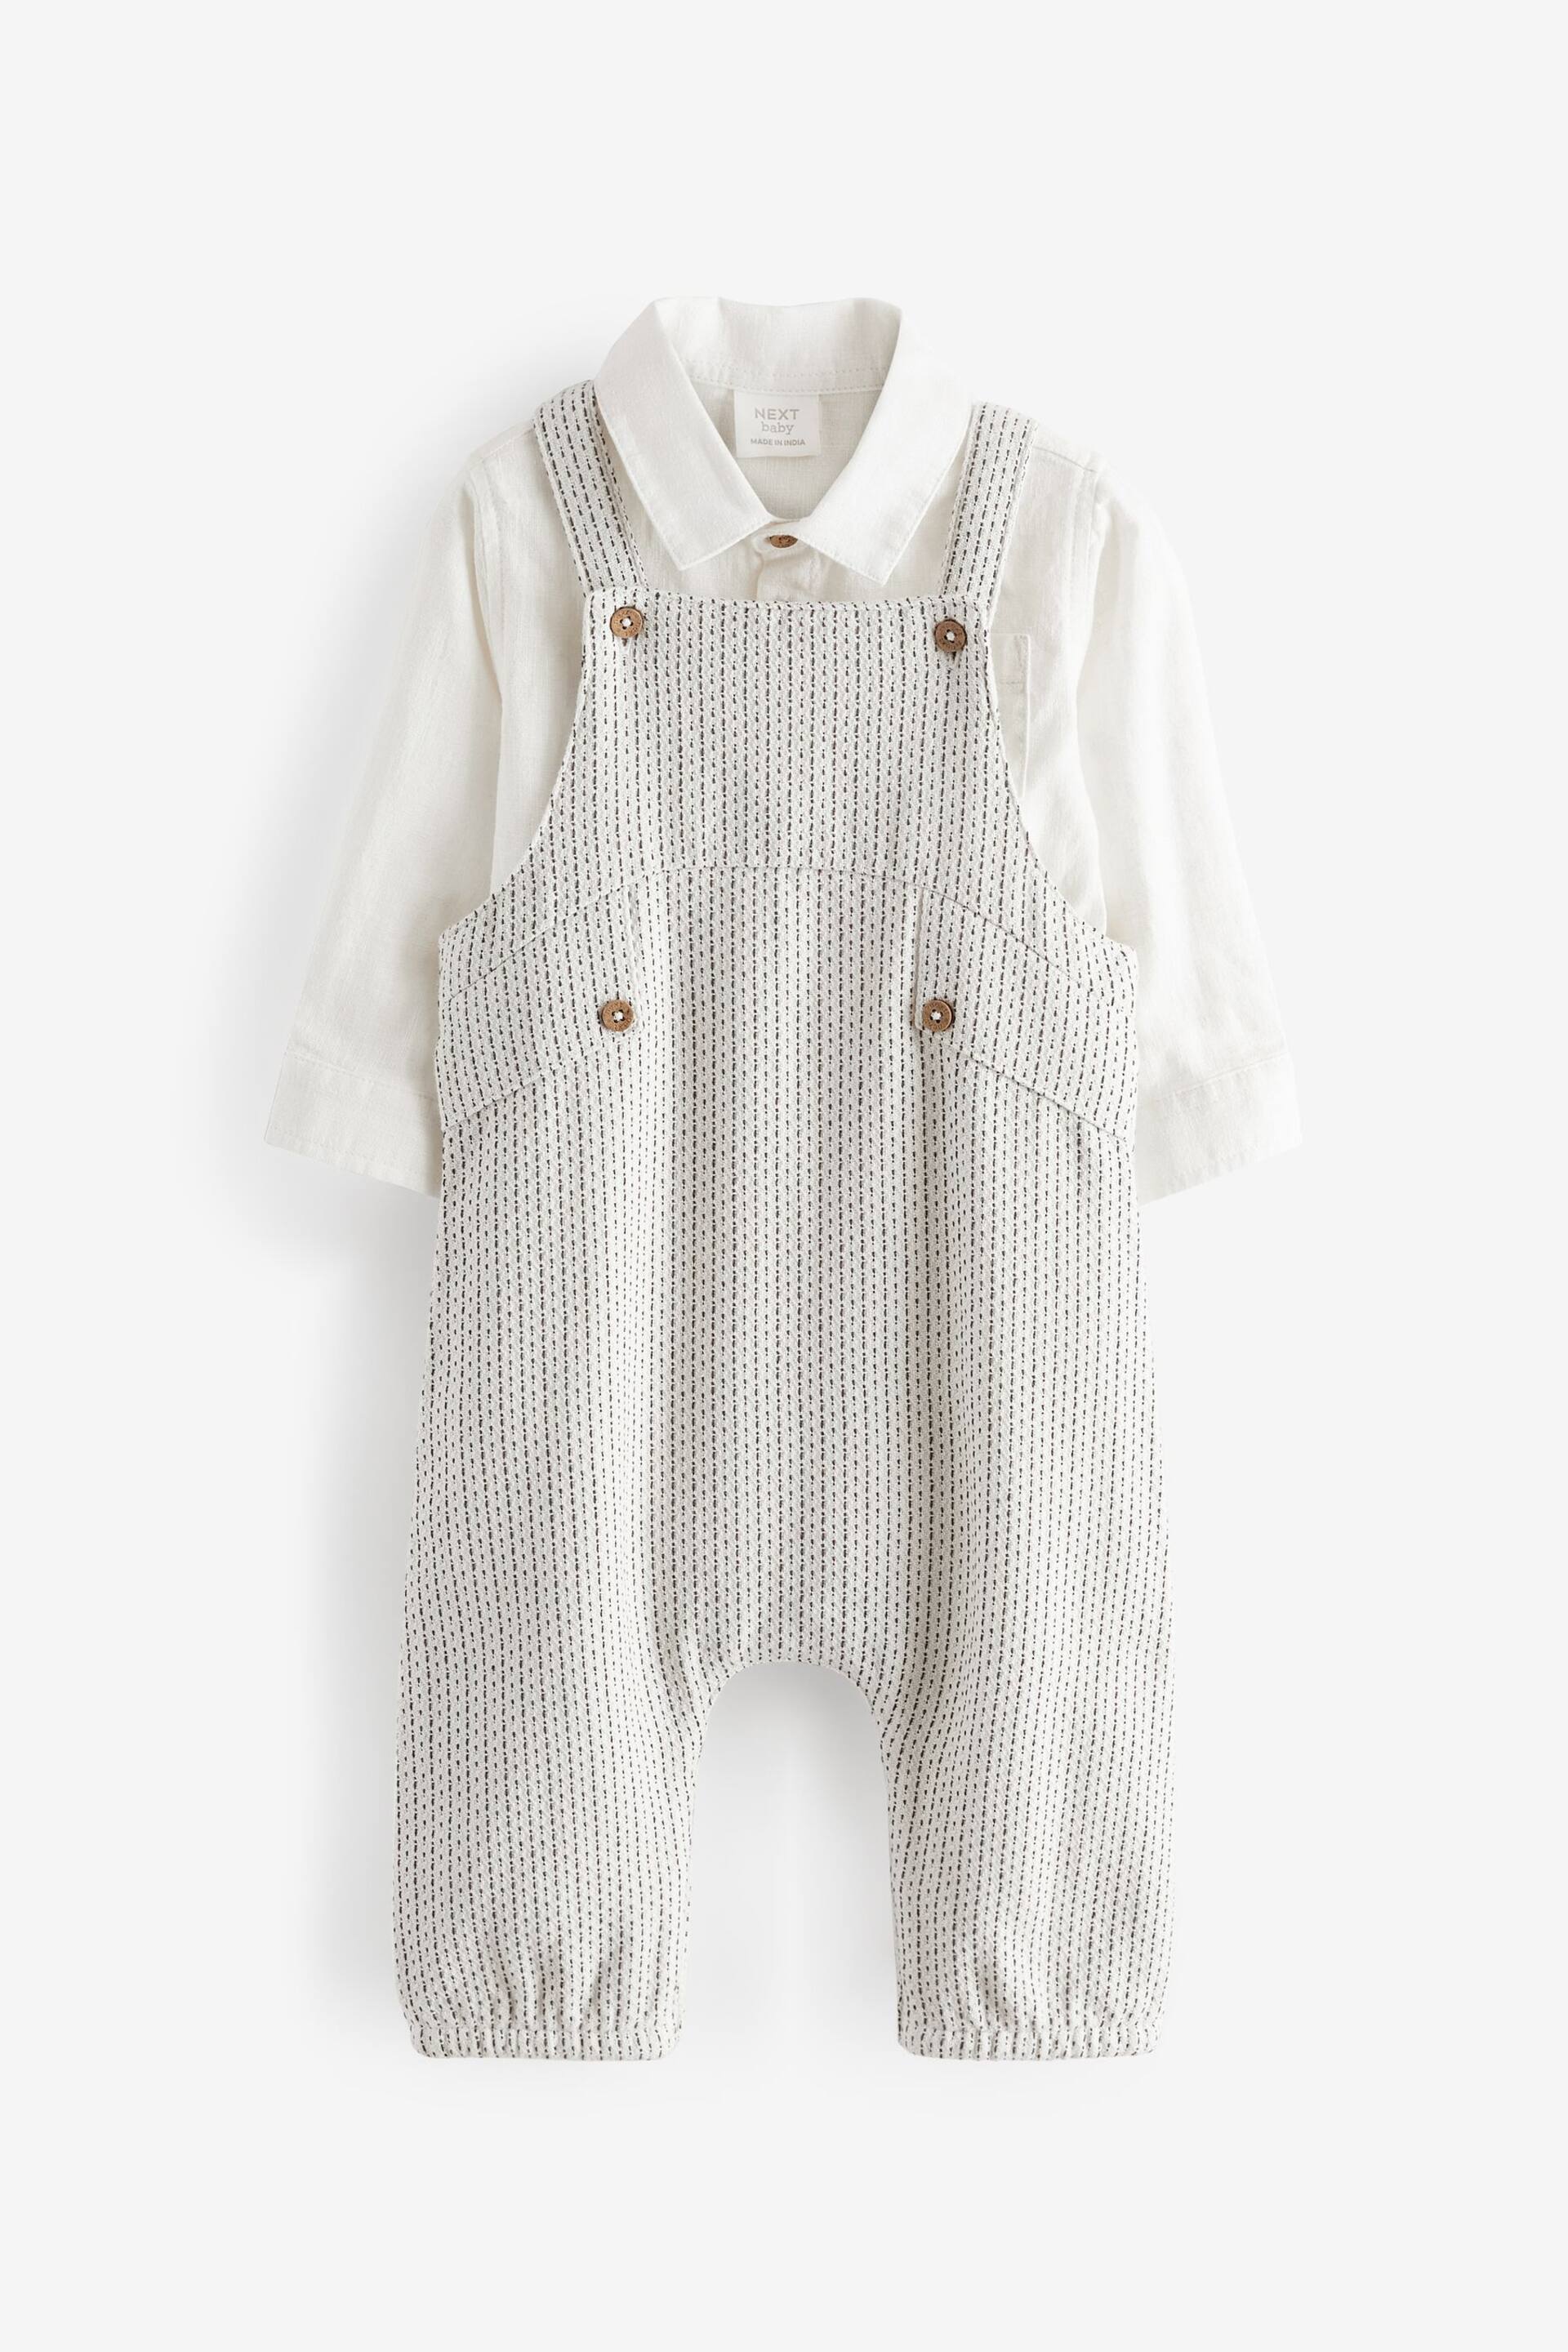 Grey/White Baby Woven Dungarees And Shirt Set (0mths-3yrs) - Image 1 of 4